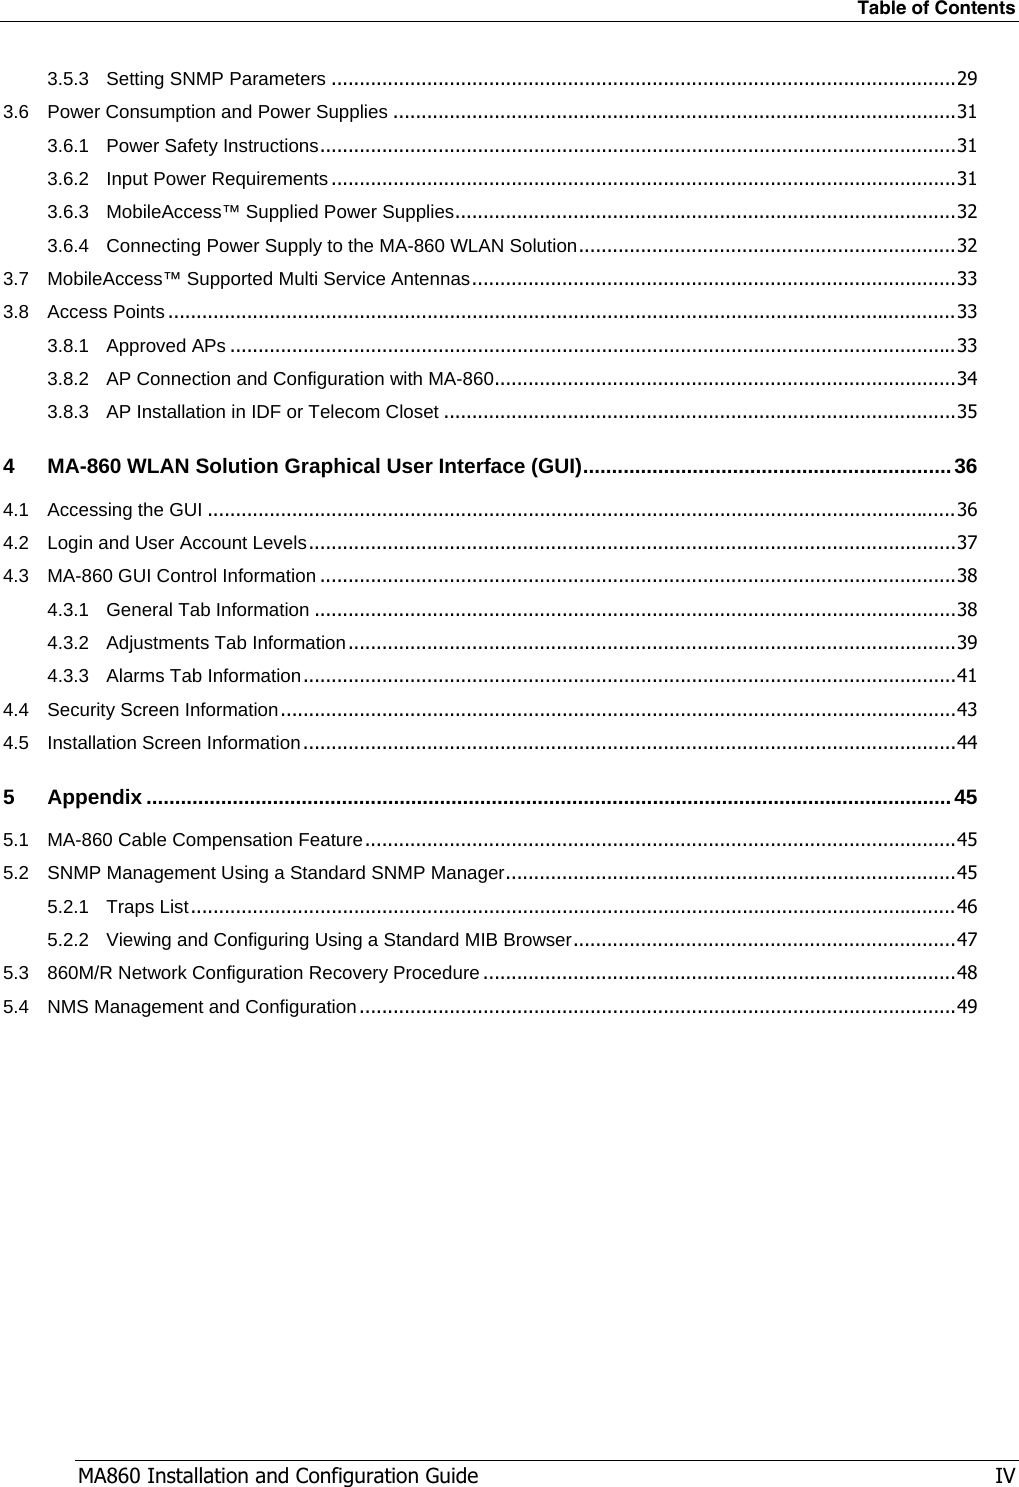 Table of Contents MA860 Installation and Configuration Guide   IV 3.5.3 Setting SNMP Parameters ...............................................................................................................29 3.6 Power Consumption and Power Supplies ....................................................................................................31 3.6.1 Power Safety Instructions.................................................................................................................31 3.6.2 Input Power Requirements ...............................................................................................................31 3.6.3 MobileAccess™ Supplied Power Supplies.........................................................................................32 3.6.4 Connecting Power Supply to the MA-860 WLAN Solution...................................................................32 3.7 MobileAccess™ Supported Multi Service Antennas......................................................................................33 3.8 Access Points ............................................................................................................................................33 3.8.1 Approved APs .................................................................................................................................33 3.8.2 AP Connection and Configuration with MA-860..................................................................................34 3.8.3 AP Installation in IDF or Telecom Closet ...........................................................................................35 4 MA-860 WLAN Solution Graphical User Interface (GUI)................................................................36 4.1 Accessing the GUI .....................................................................................................................................36 4.2 Login and User Account Levels...................................................................................................................37 4.3 MA-860 GUI Control Information .................................................................................................................38 4.3.1 General Tab Information ..................................................................................................................38 4.3.2 Adjustments Tab Information............................................................................................................39 4.3.3 Alarms Tab Information....................................................................................................................41 4.4 Security Screen Information........................................................................................................................43 4.5 Installation Screen Information....................................................................................................................44 5 Appendix ............................................................................................................................................45 5.1 MA-860 Cable Compensation Feature.........................................................................................................45 5.2 SNMP Management Using a Standard SNMP Manager................................................................................45 5.2.1 Traps List........................................................................................................................................46 5.2.2 Viewing and Configuring Using a Standard MIB Browser....................................................................47 5.3 860M/R Network Configuration Recovery Procedure ....................................................................................48 5.4 NMS Management and Configuration..........................................................................................................49   